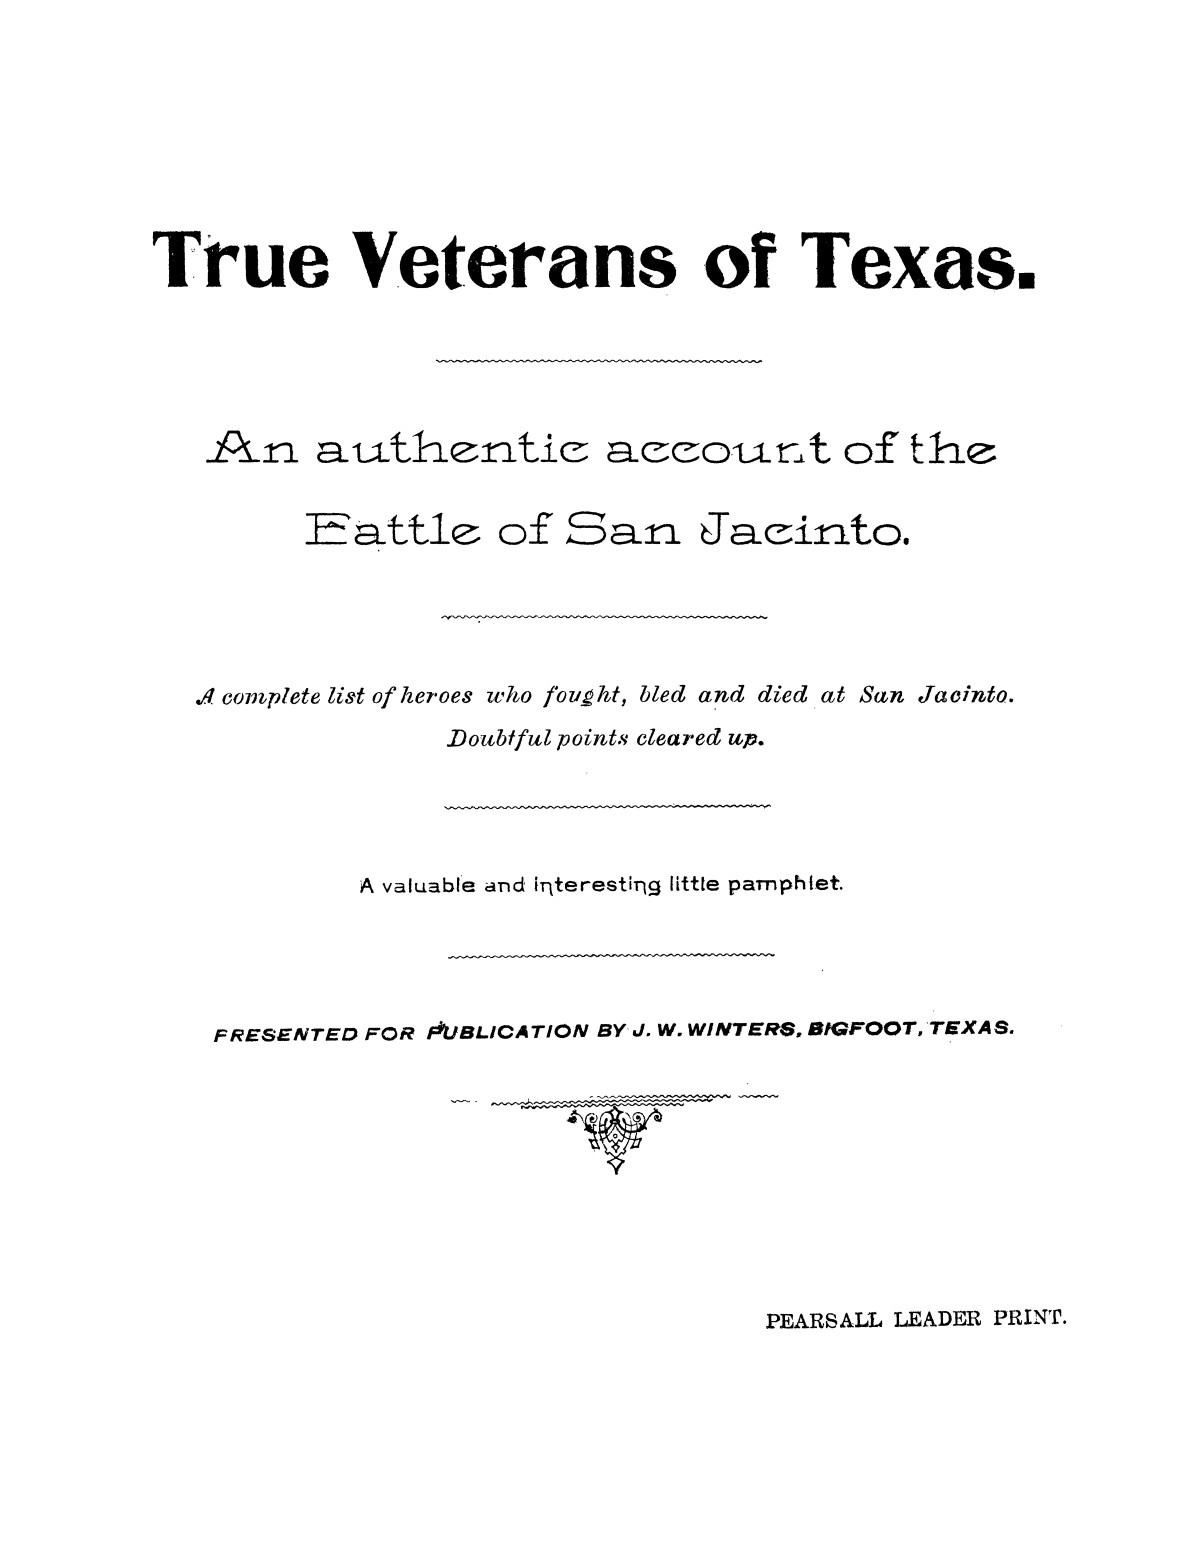 True veterans of Texas : an authentic account of the Battle of San Jacinto : a complete list of heroes who fought, bled and died at San Jacinto : doubtful points cleared up
                                                
                                                    Front Cover
                                                